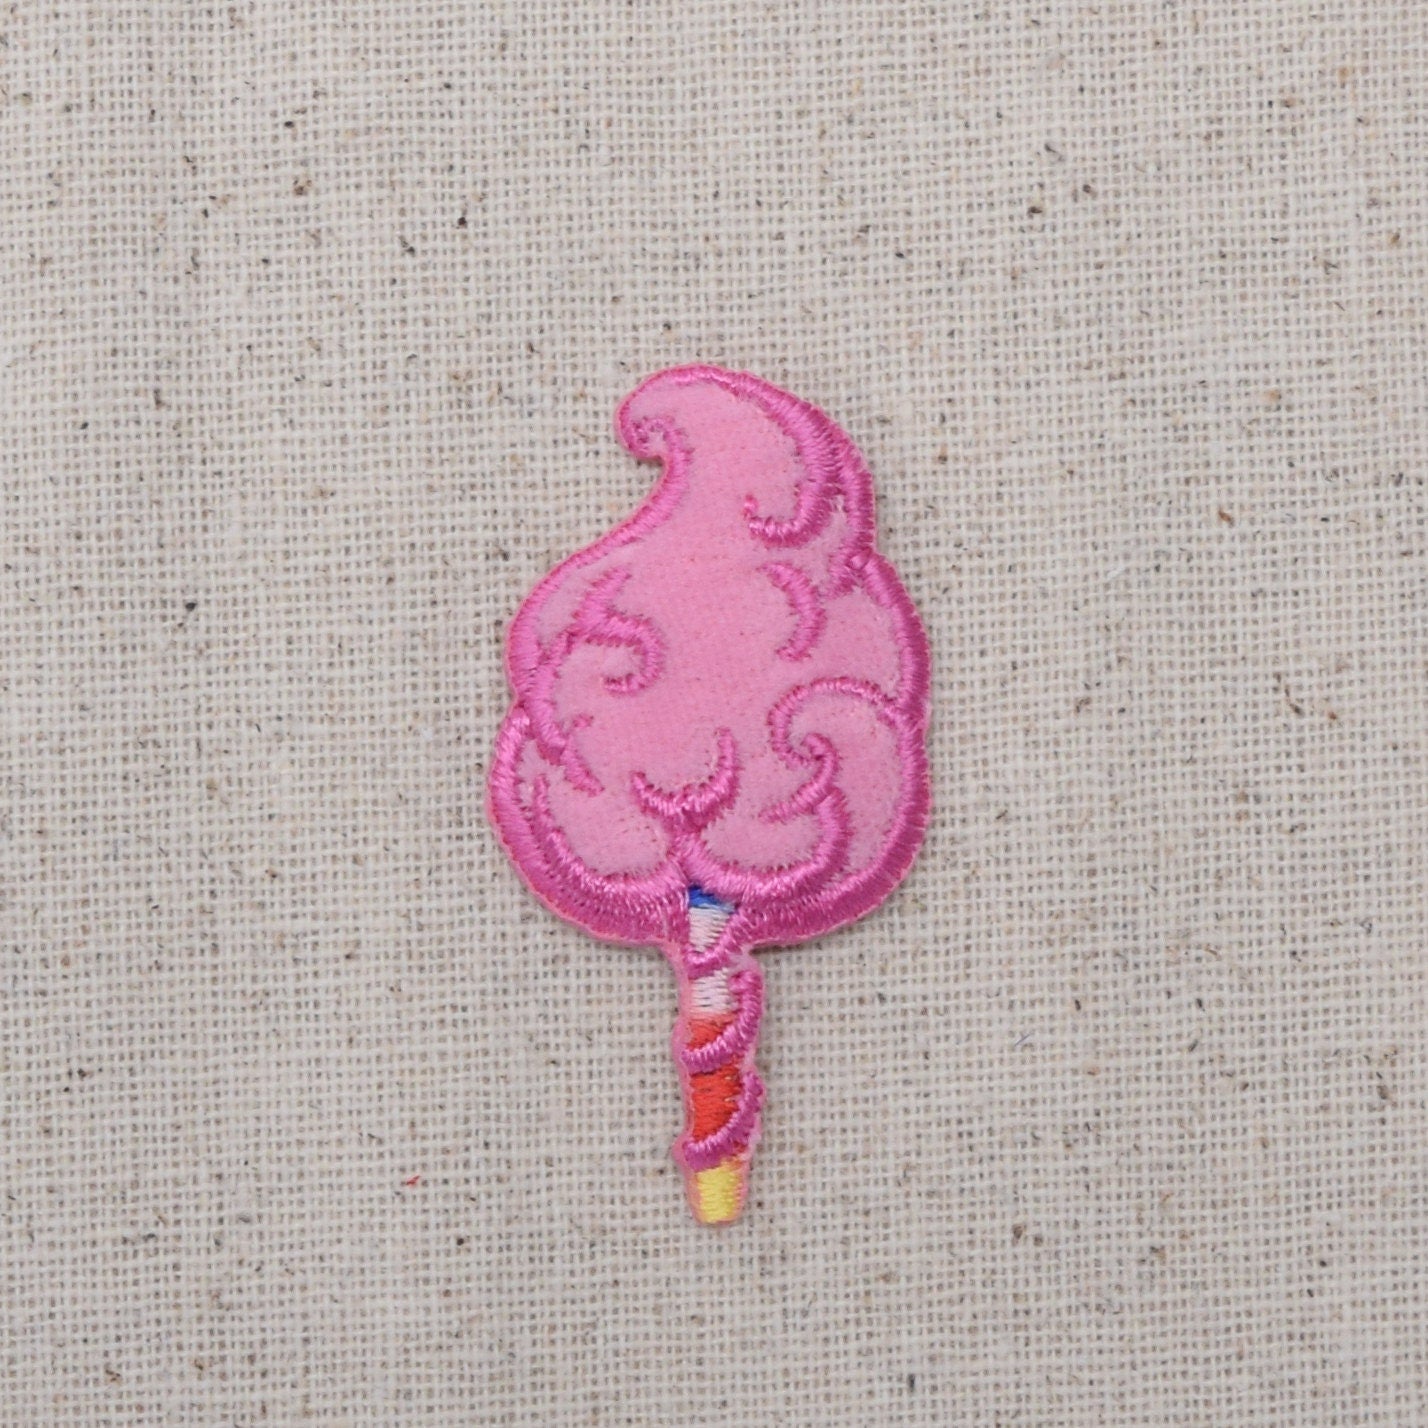 Pink Cotton Candy - Iron on Applique - Embroidered Patch - 796432-B